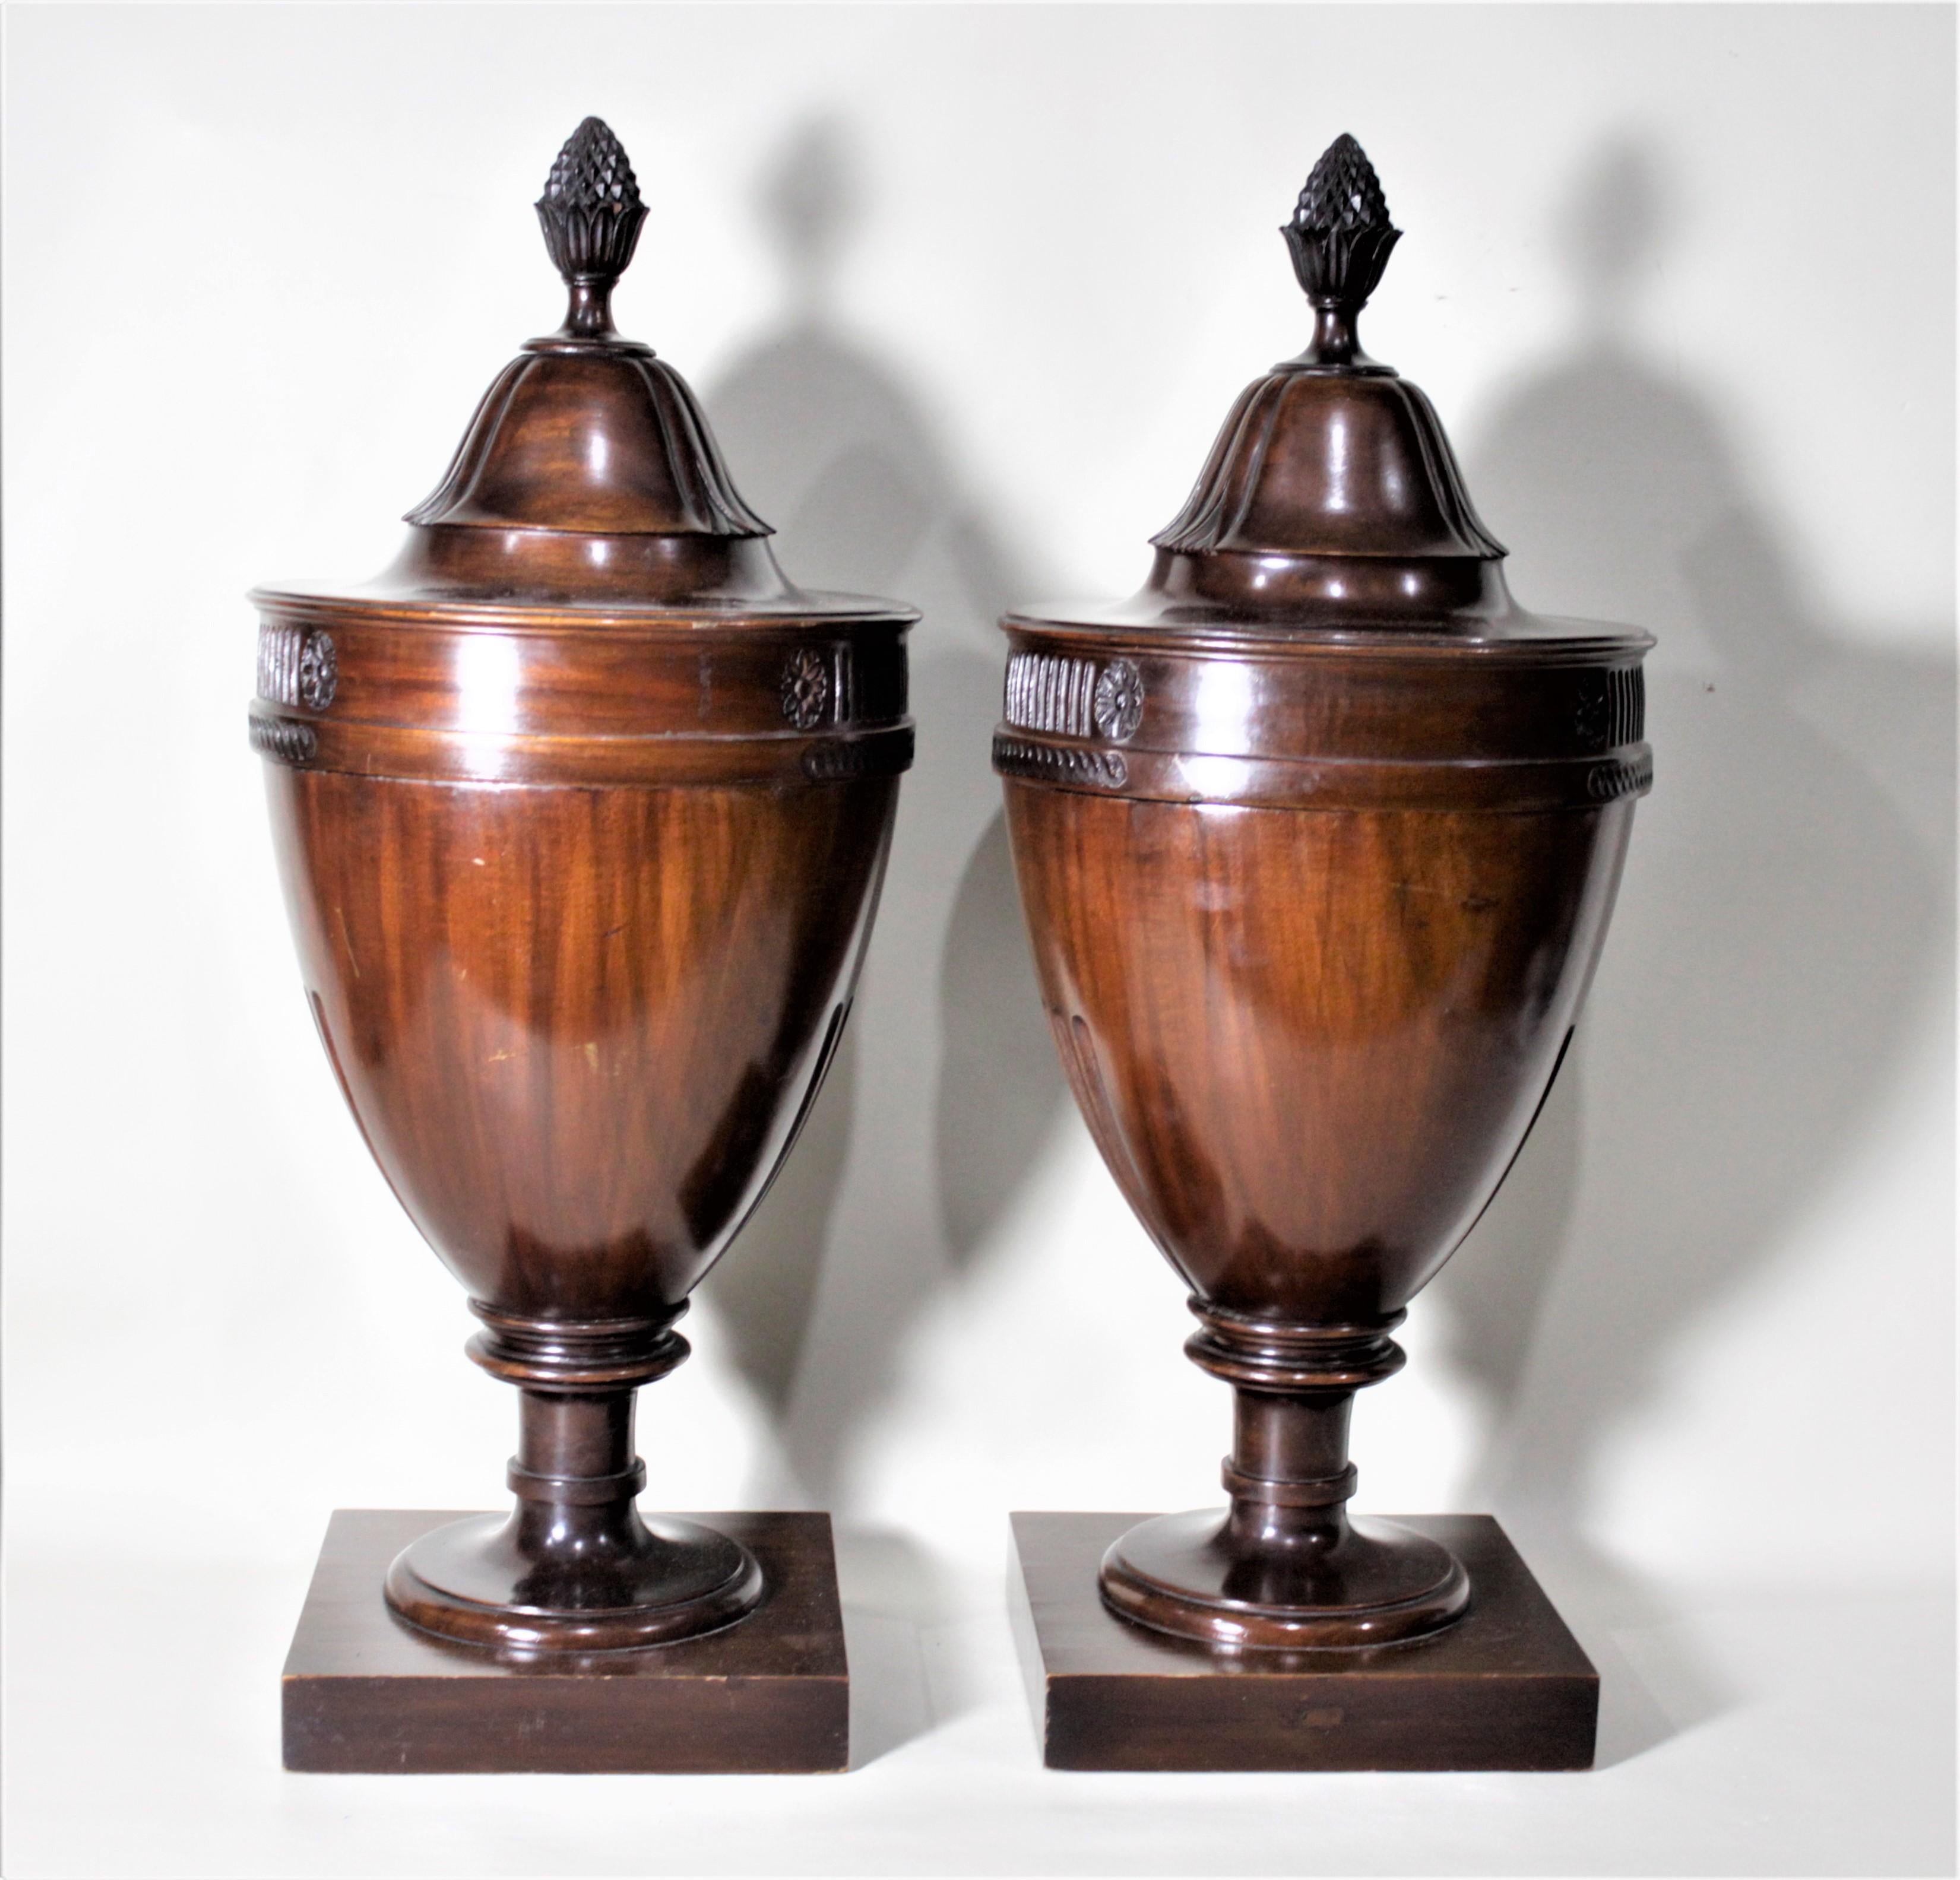 Hand-Crafted Pair of Antique Georgian Style Mahogany Knife Urns or Boxes with Carved Accents